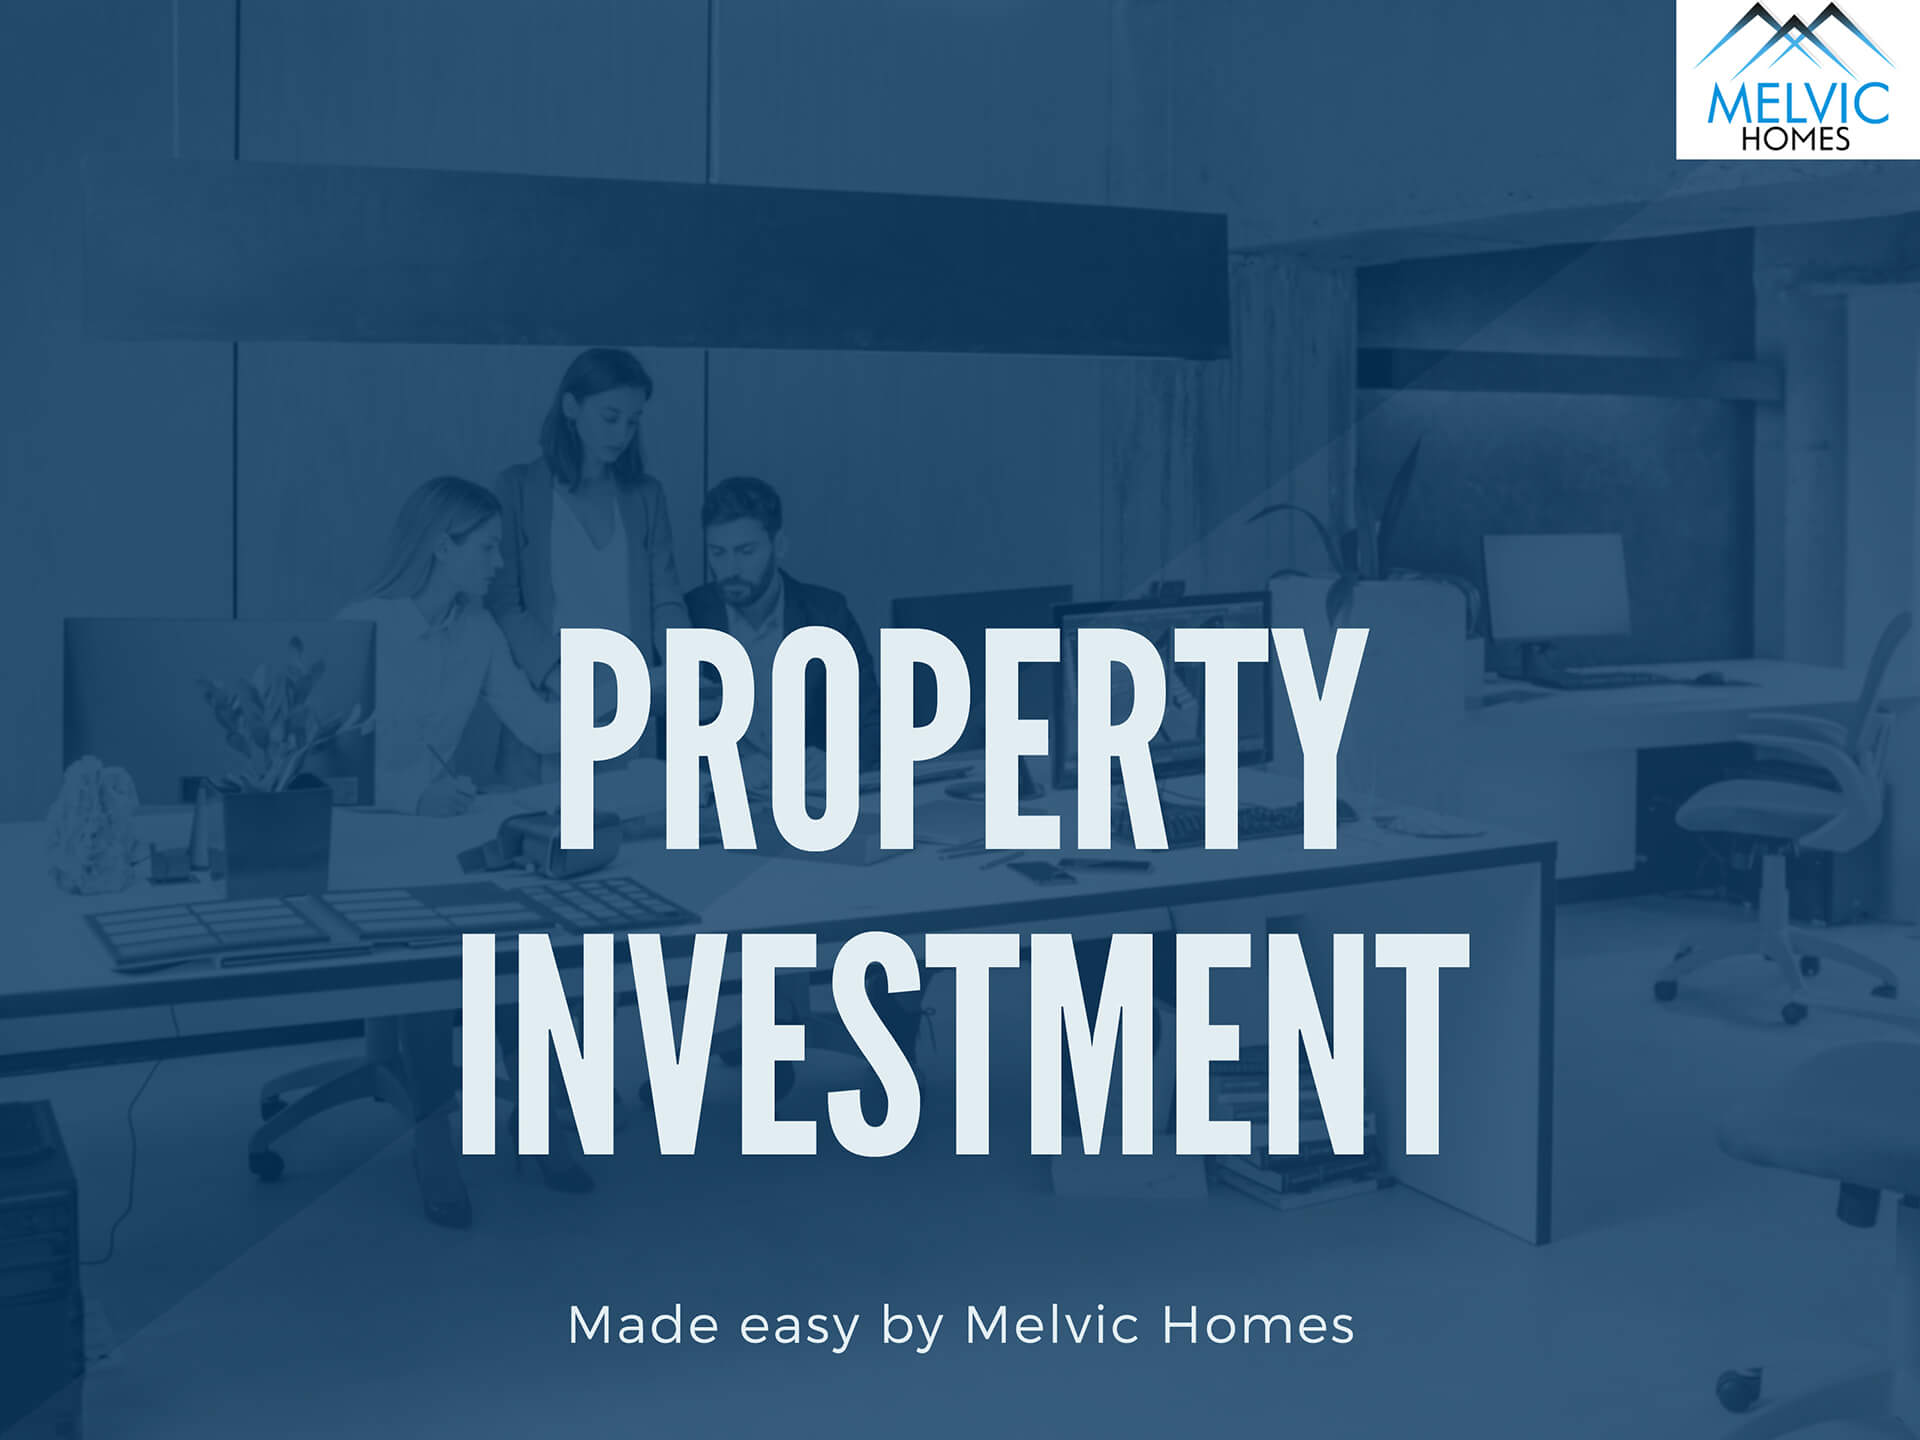 Building Investment Property Made Easy